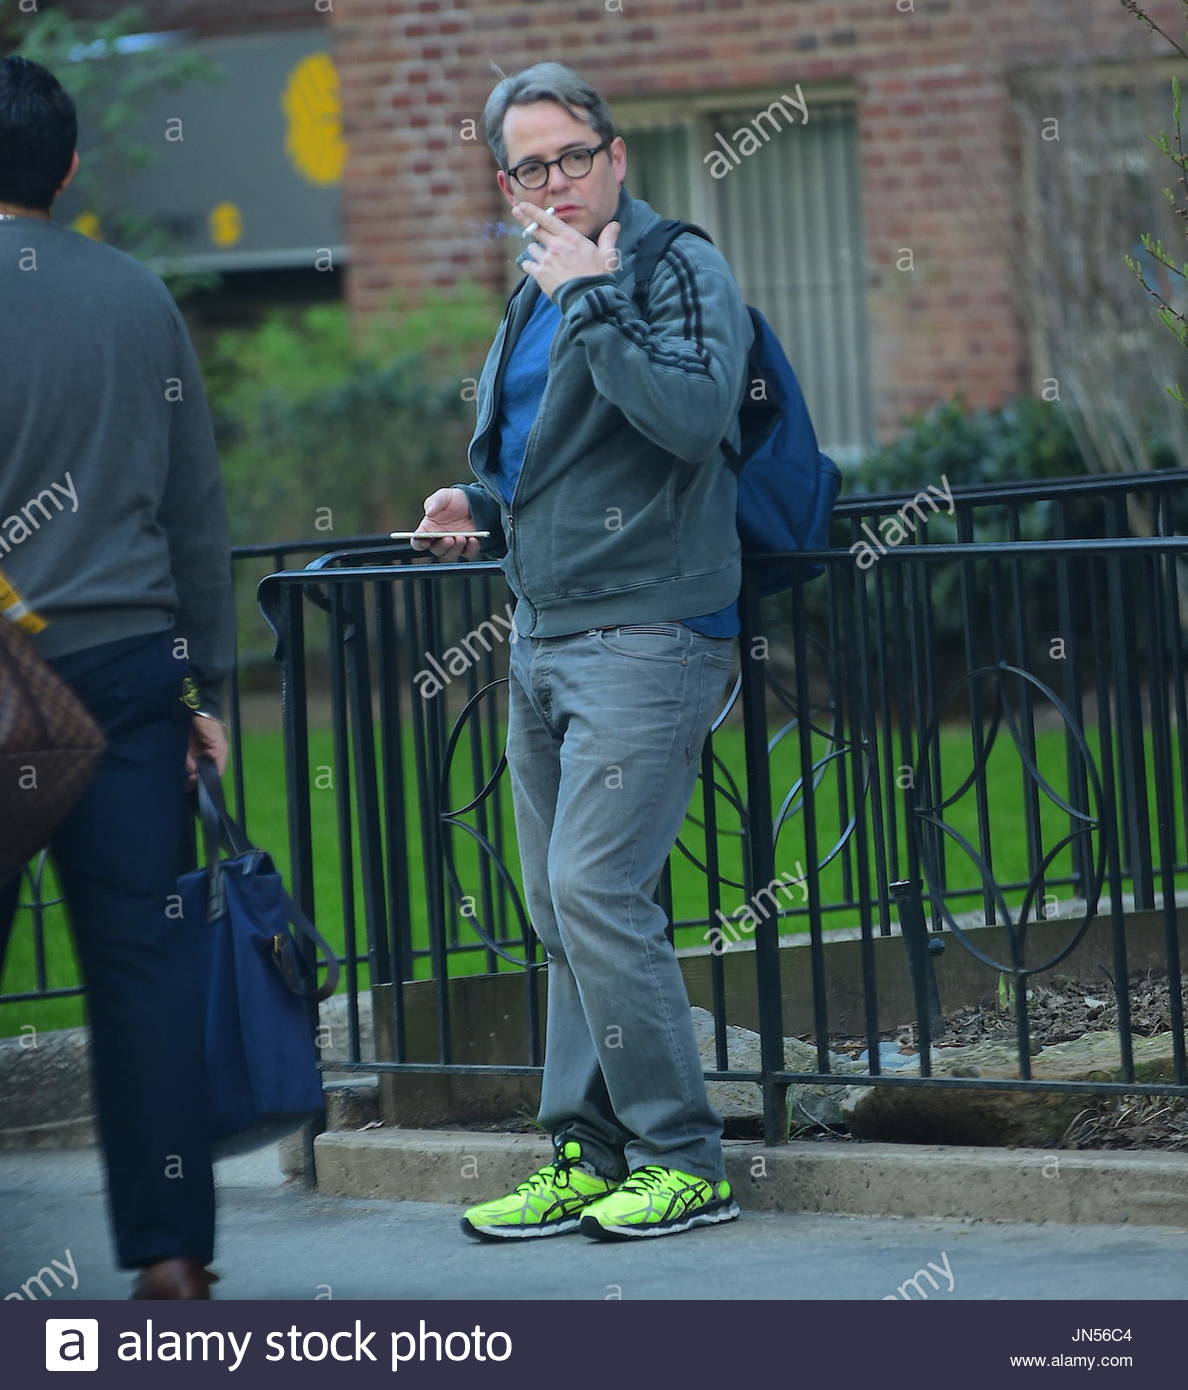 Matthew Broderick smoking a cigarette (or weed)
